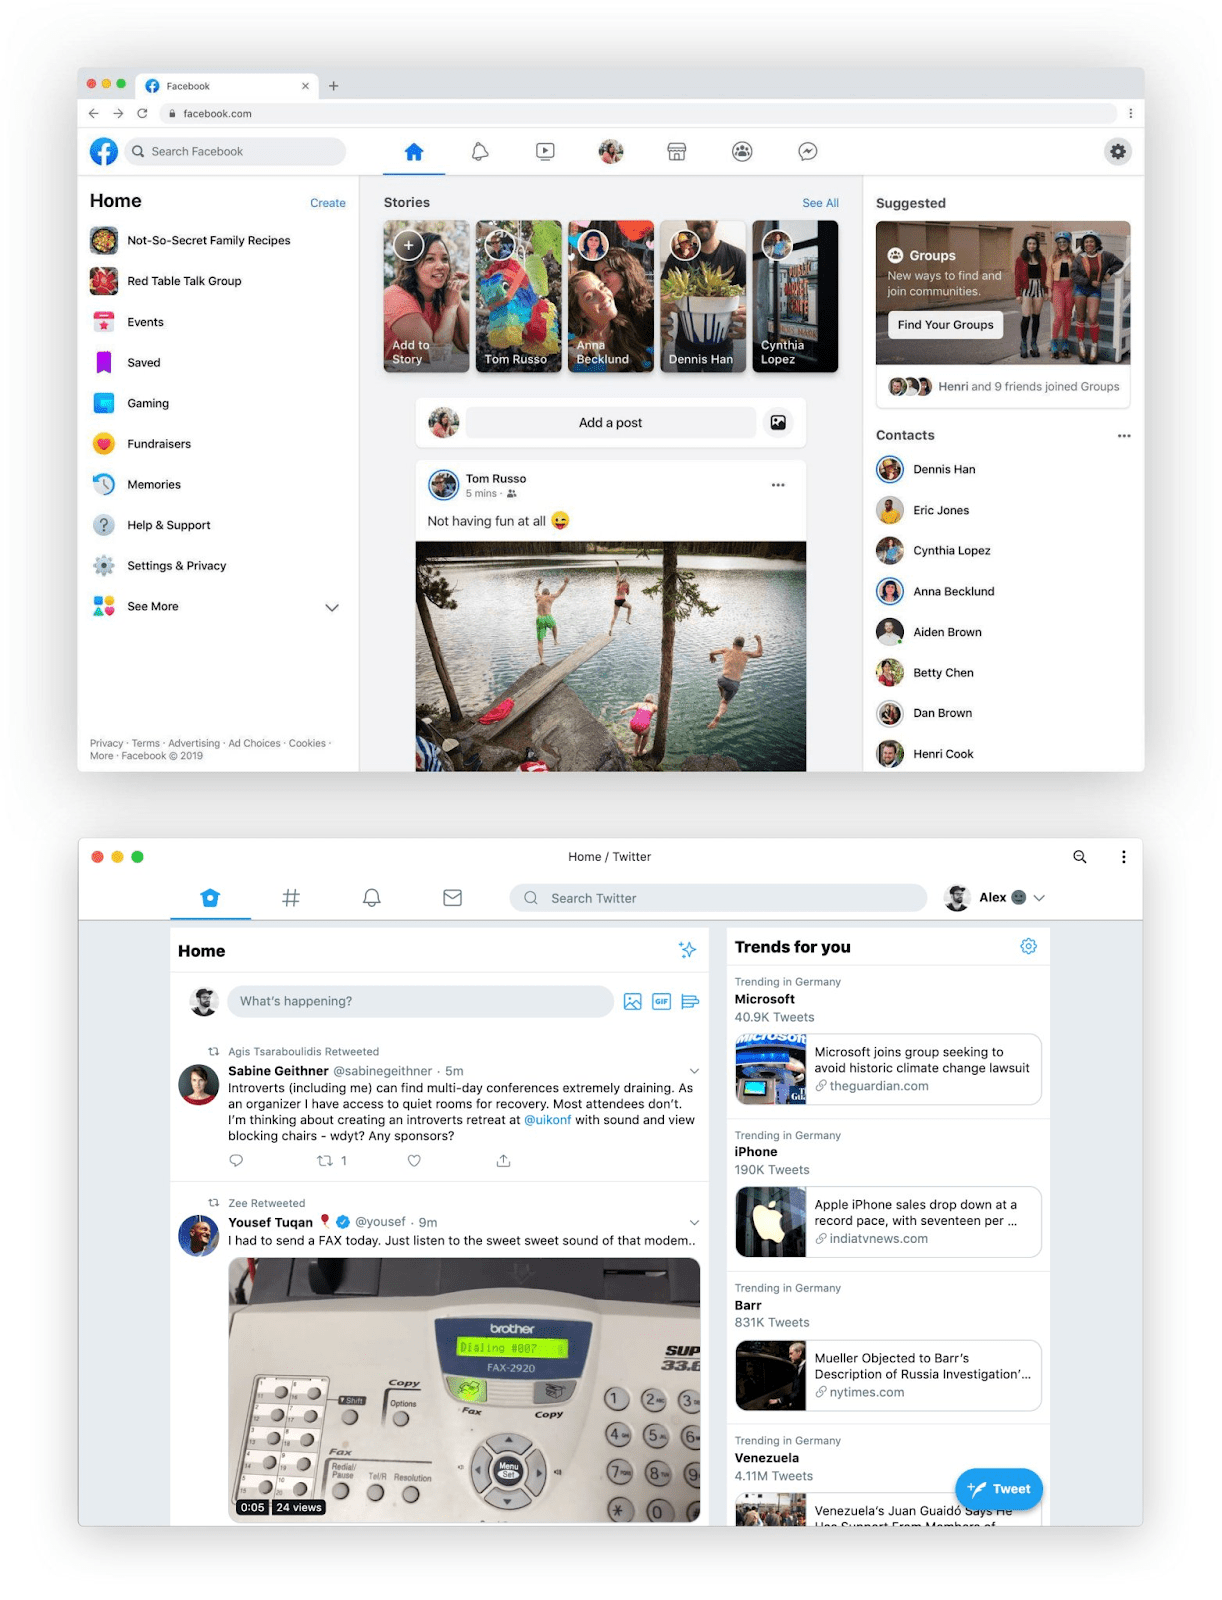 Facebook’s 2019 Redesign, compared to Twitter by Alex Muench